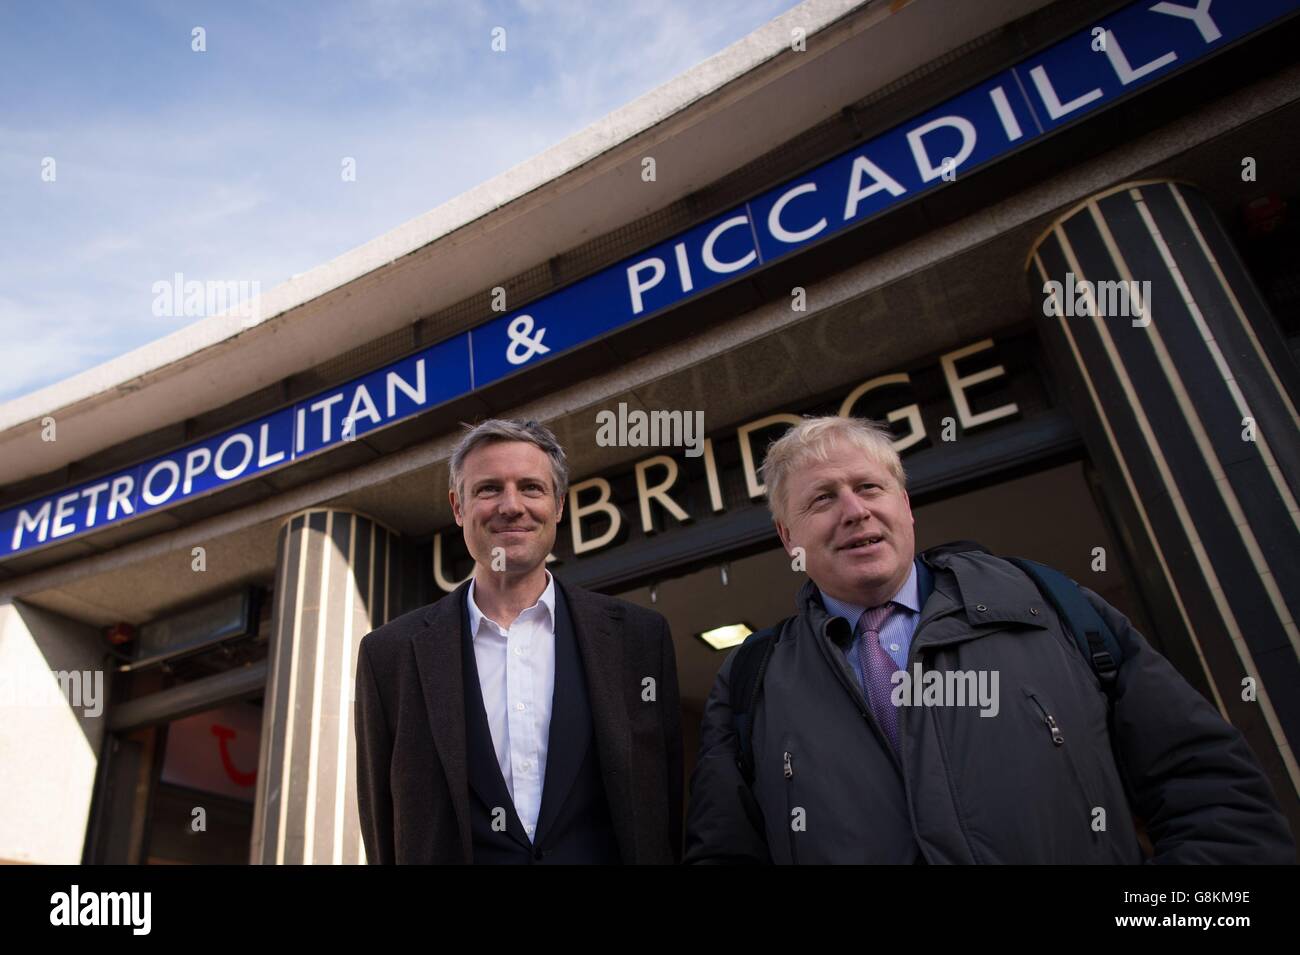 Mayor of London Boris Johnson (right) and Conservative mayoral candidate Zac Goldsmith canvassing outside Uxbridge underground station, as the race for City Hall hots up ahead of the vote in May. Stock Photo